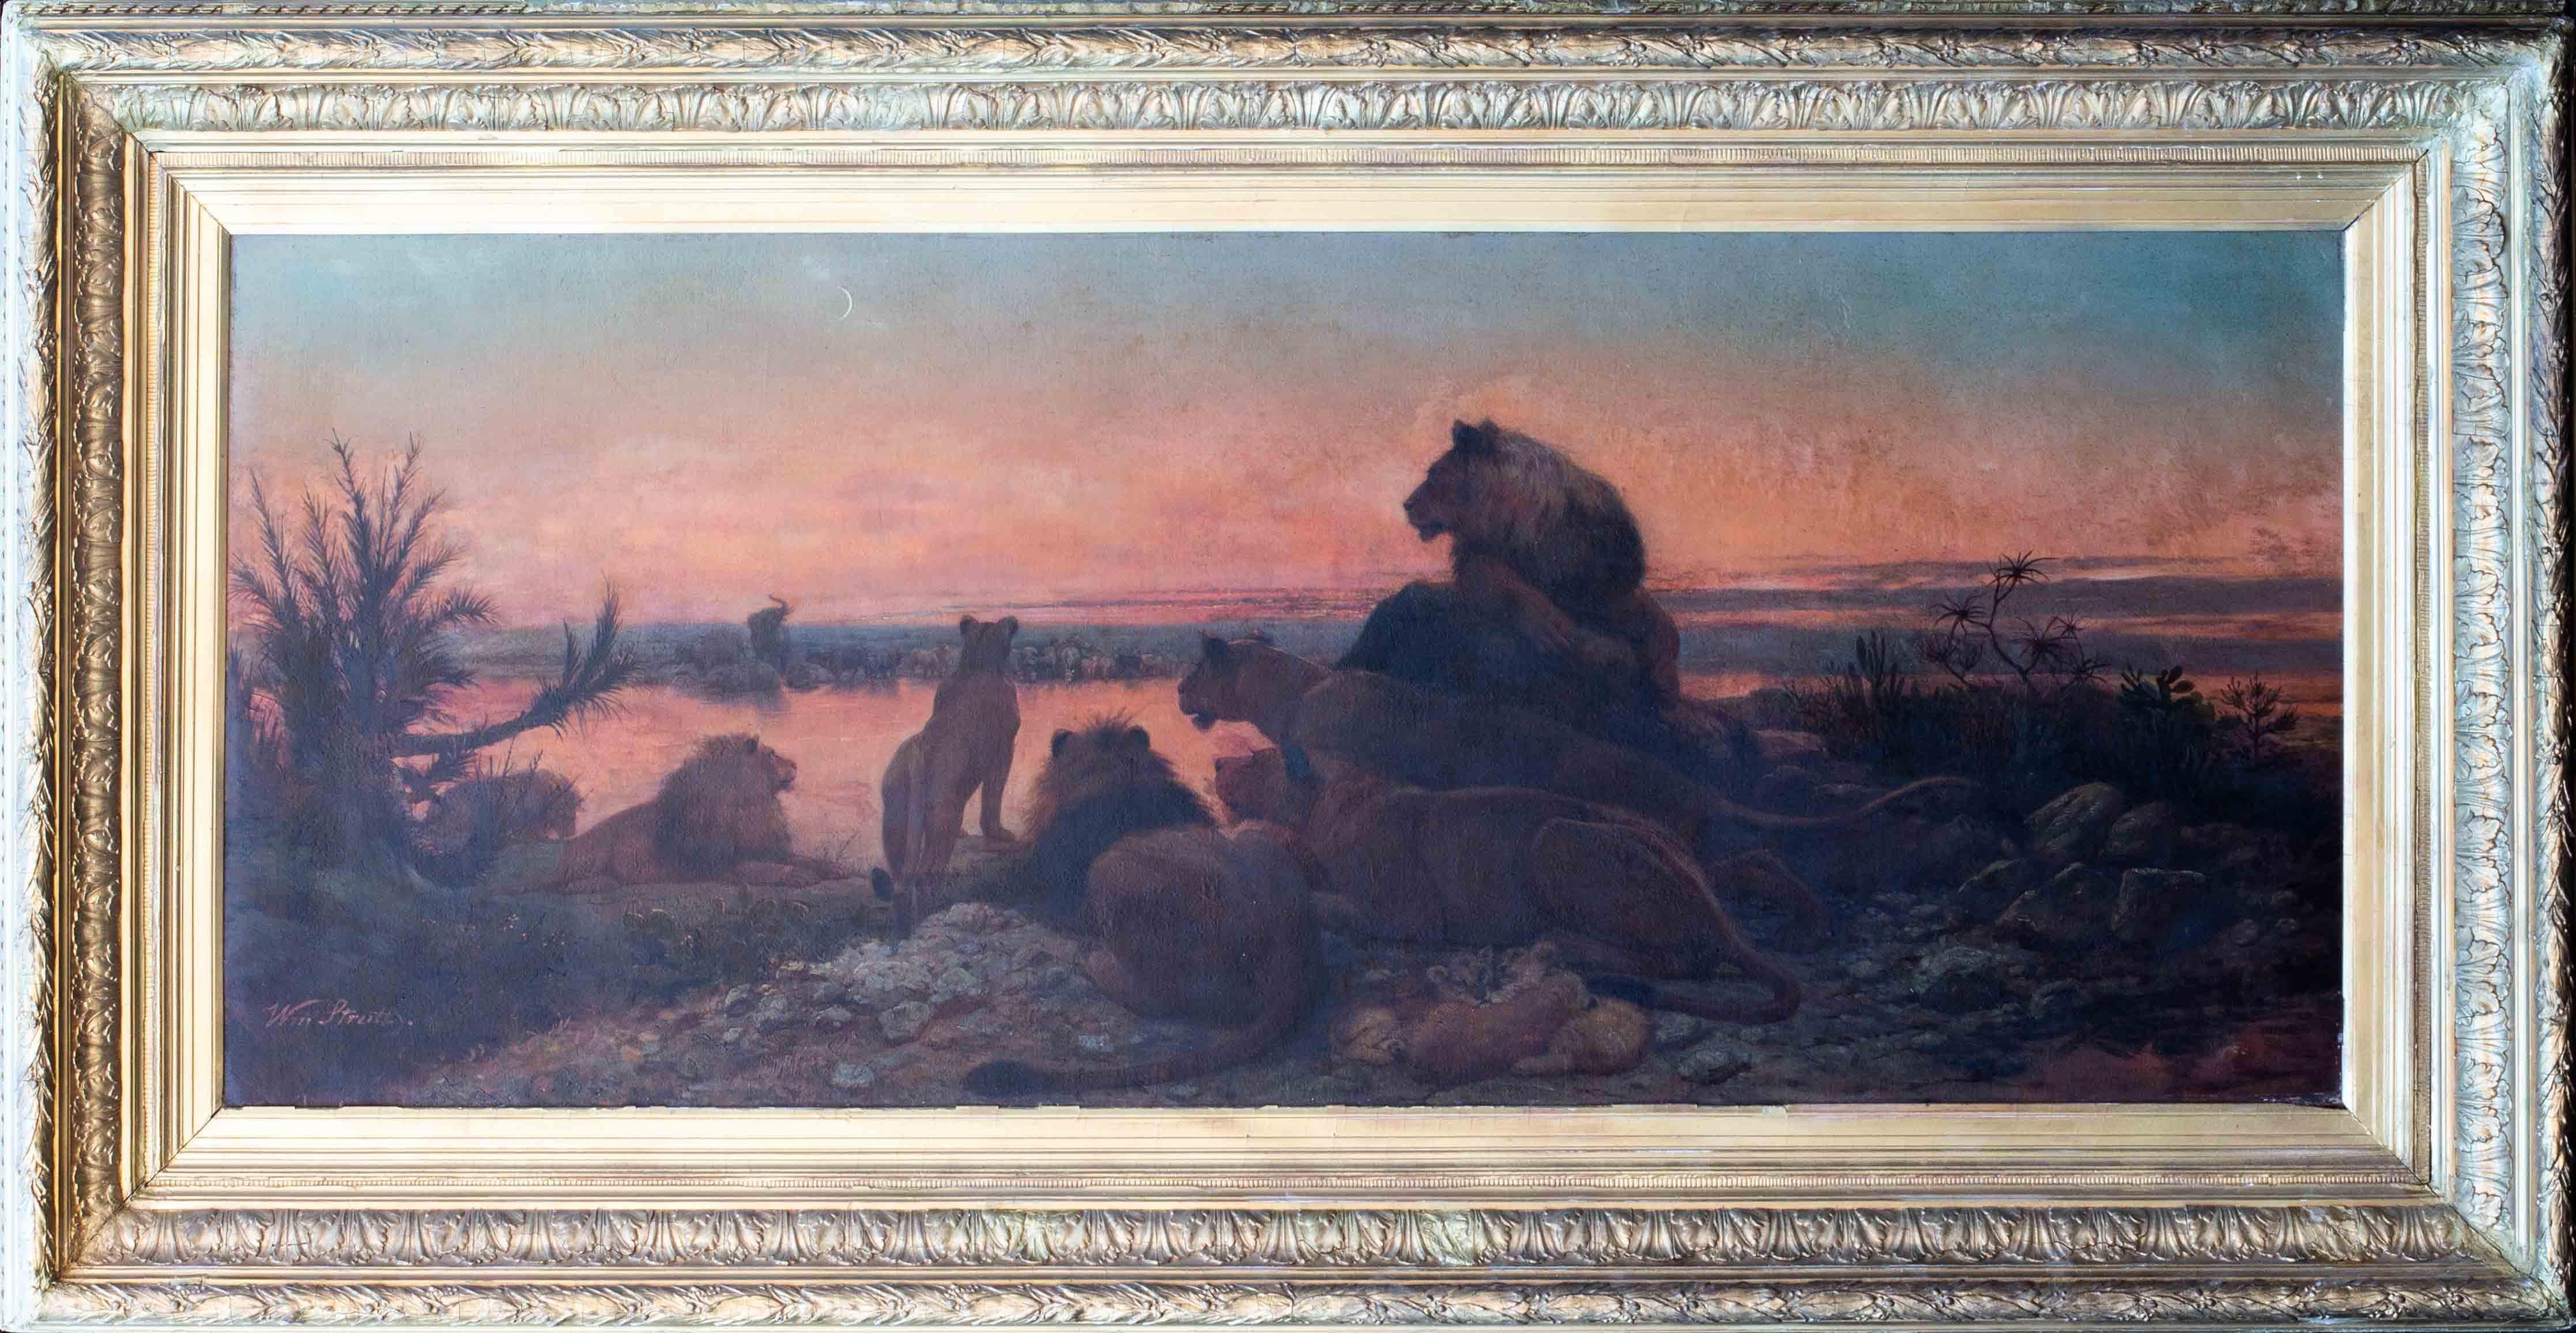 William Strutt RBA FZS Animal Painting - Large 19th Century oil painting of lions, elephants and zebras at watering hole